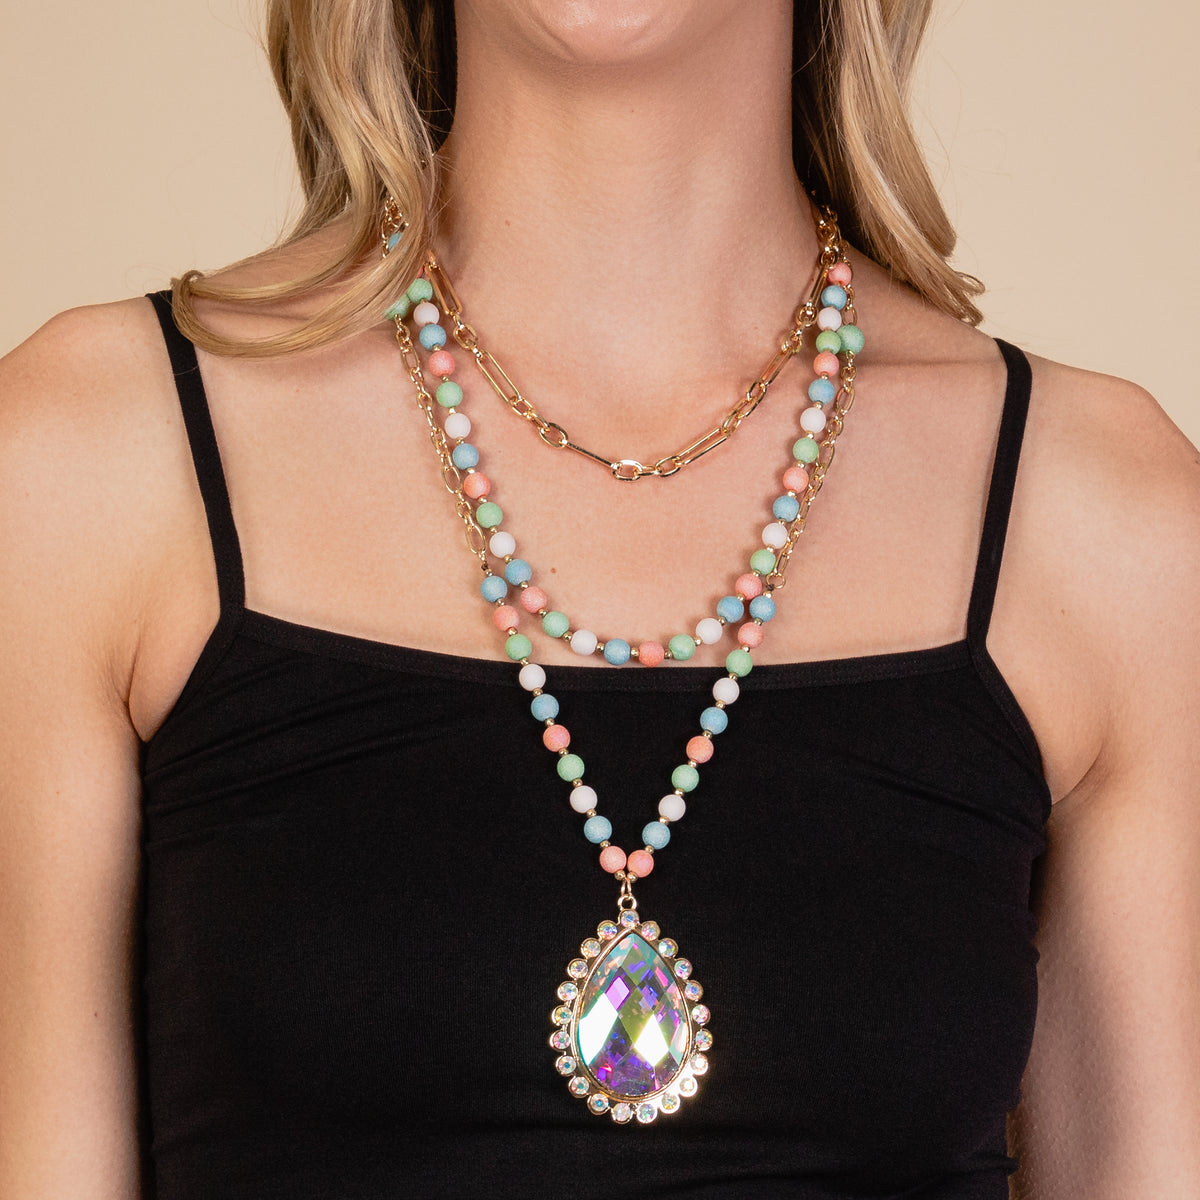 72908 - Layered Crystal Necklace - Multi